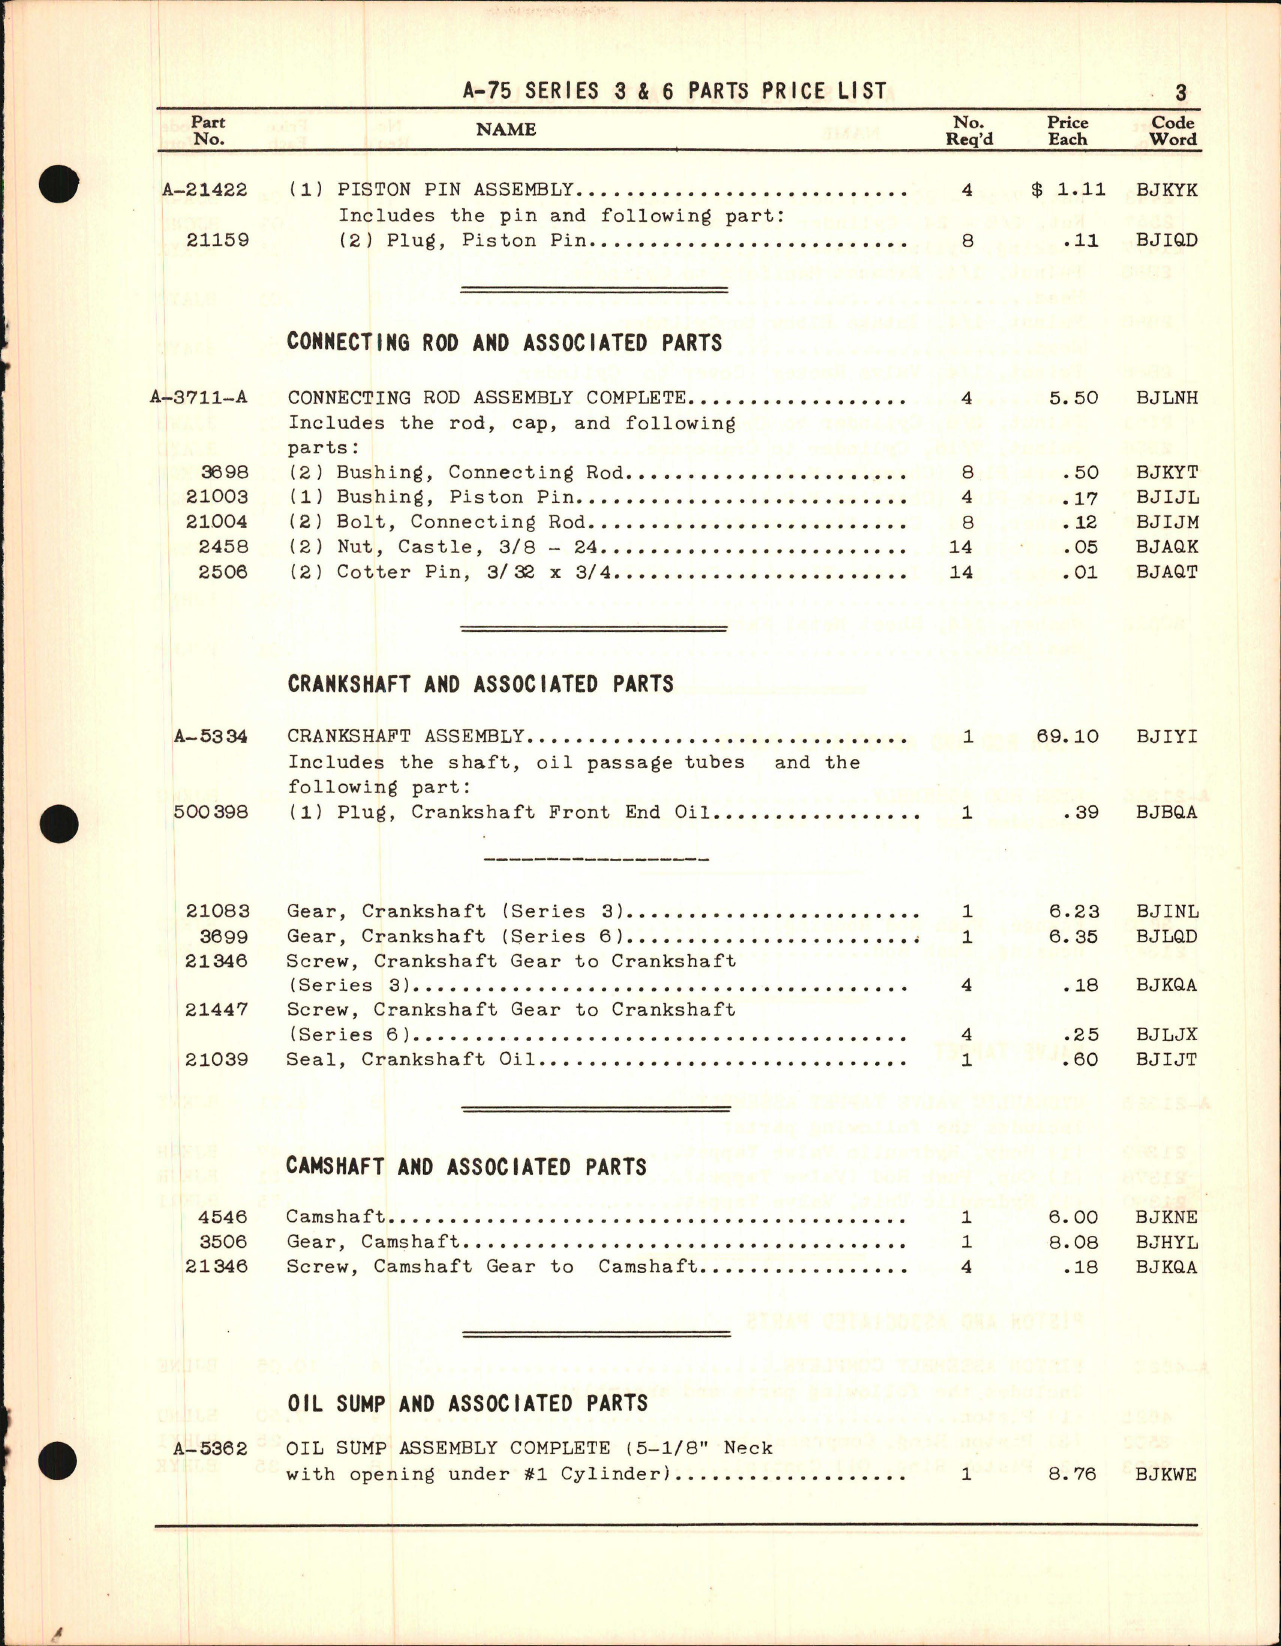 Sample page 5 from AirCorps Library document: Parts Price List for Continental A-75 Series 3 and Series 6